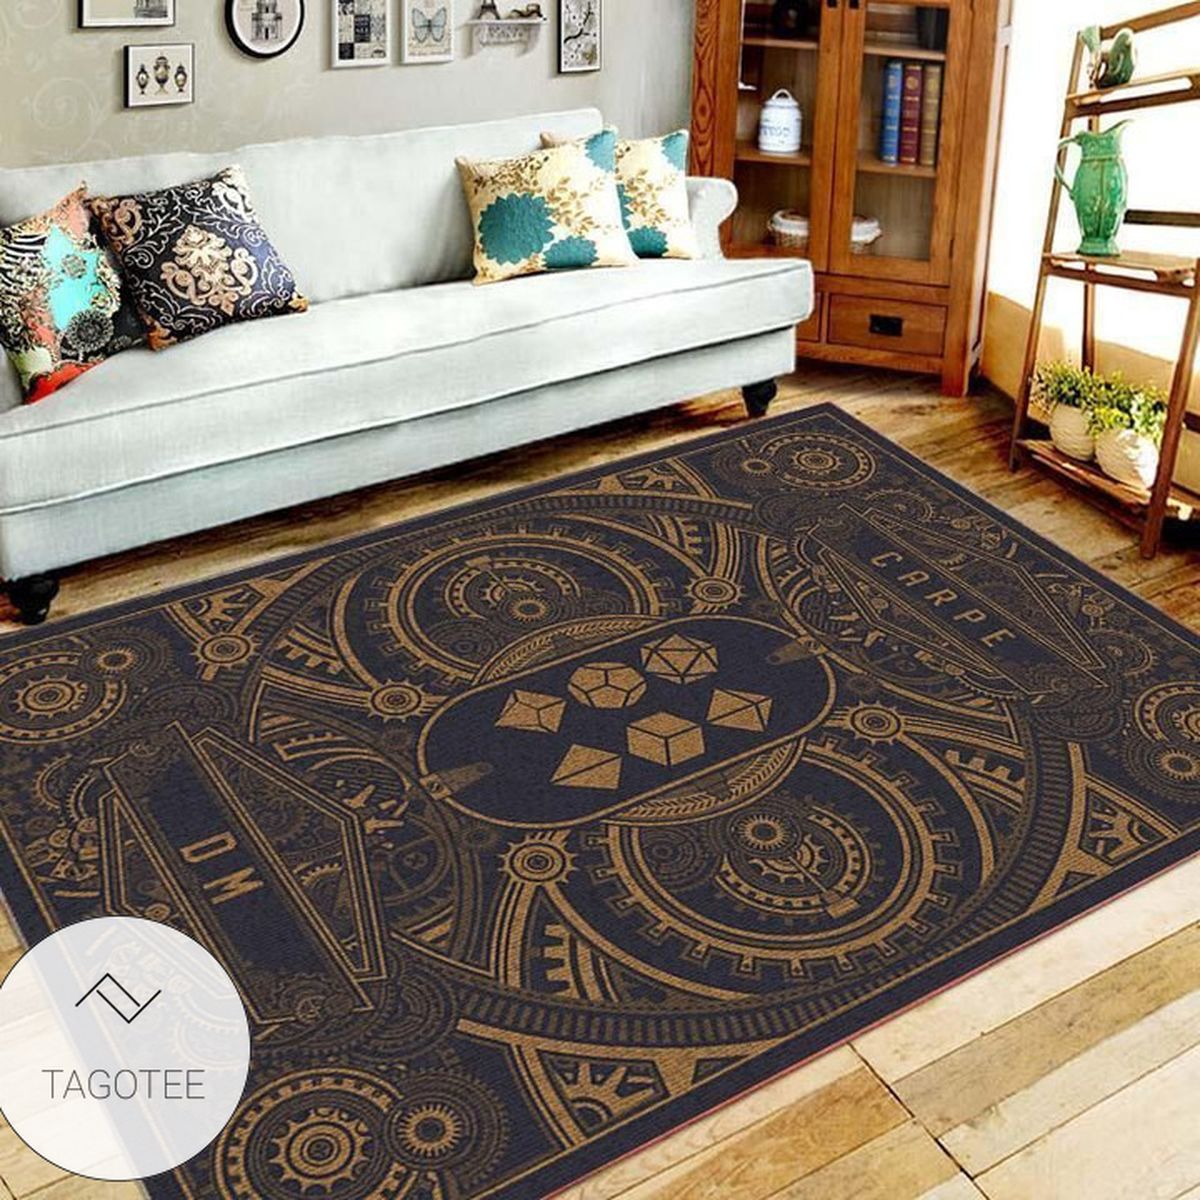 Dungeons & Dragons - 3 Area Rug - Home Decor - Bedroom Living Room Decor